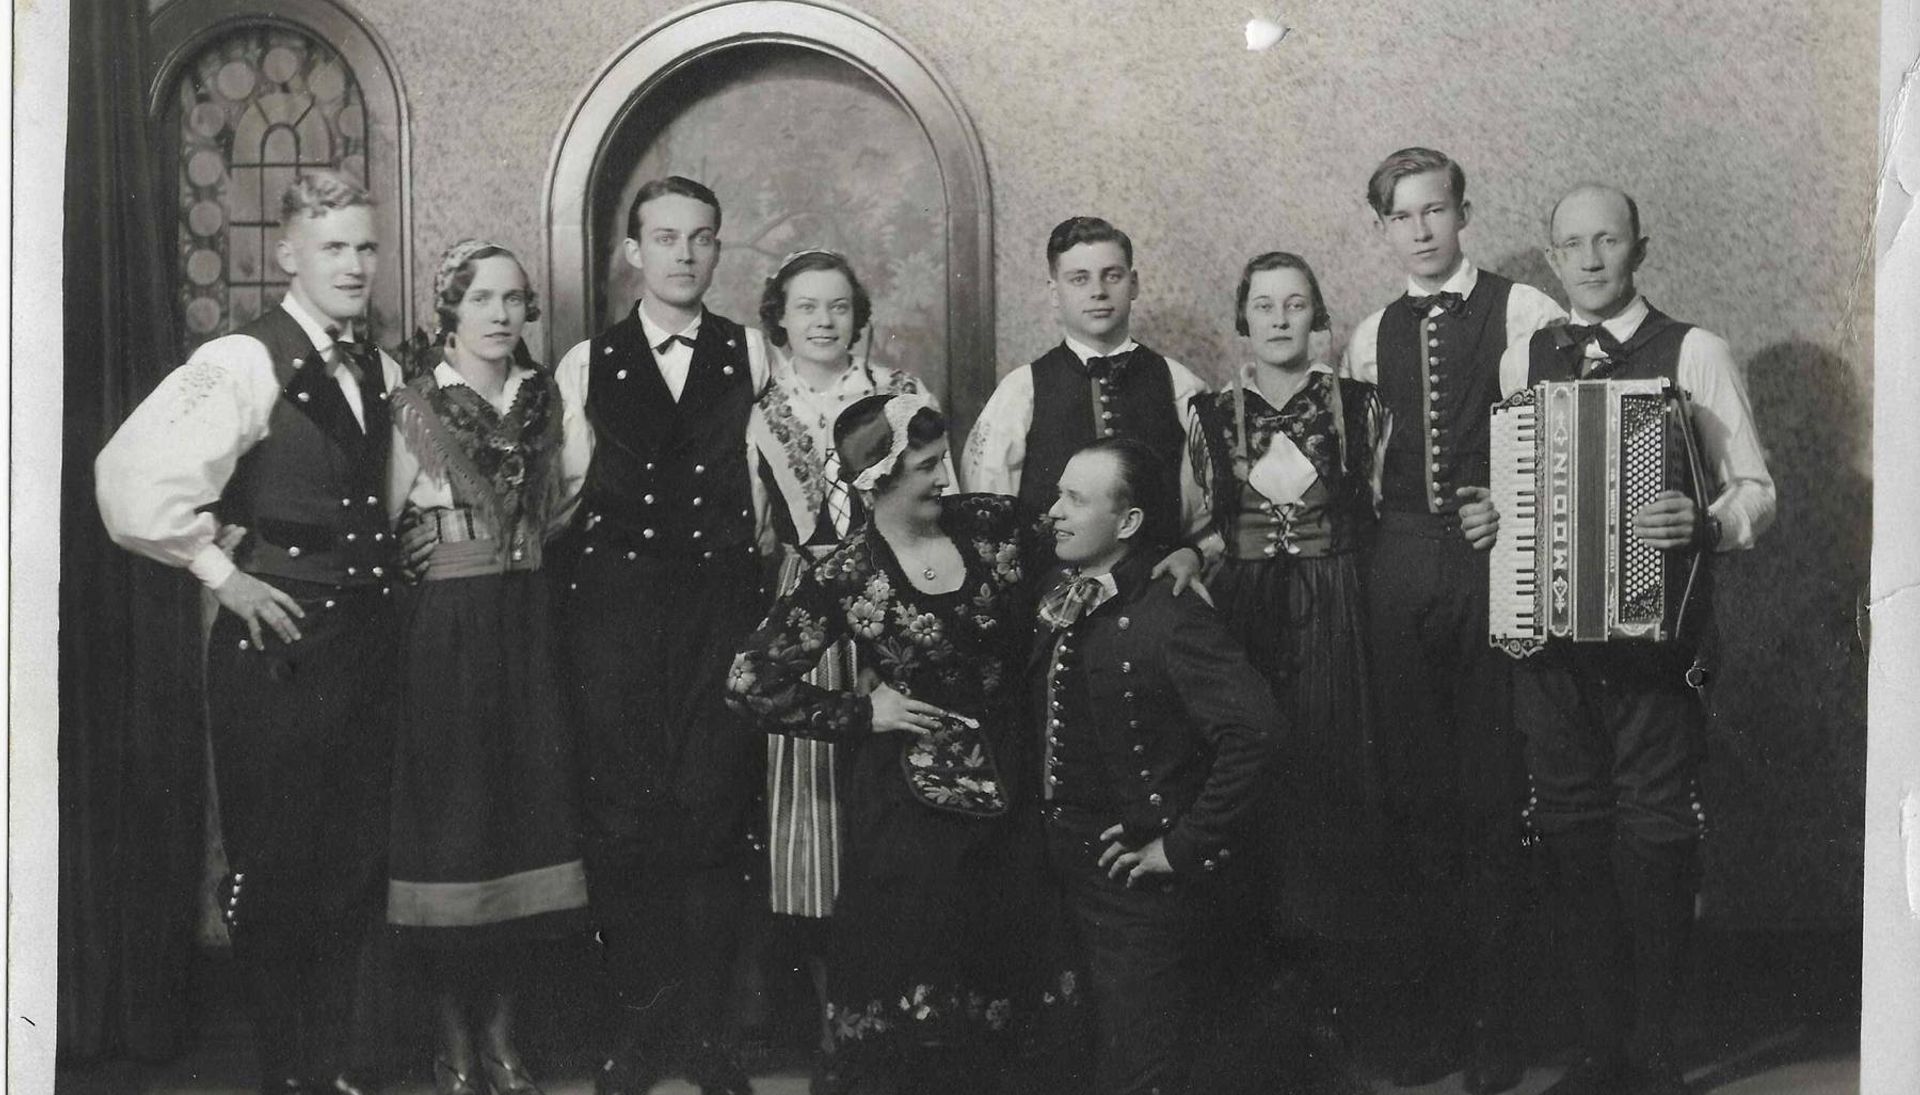 Group of performers standing in formal clothing and holding instruments